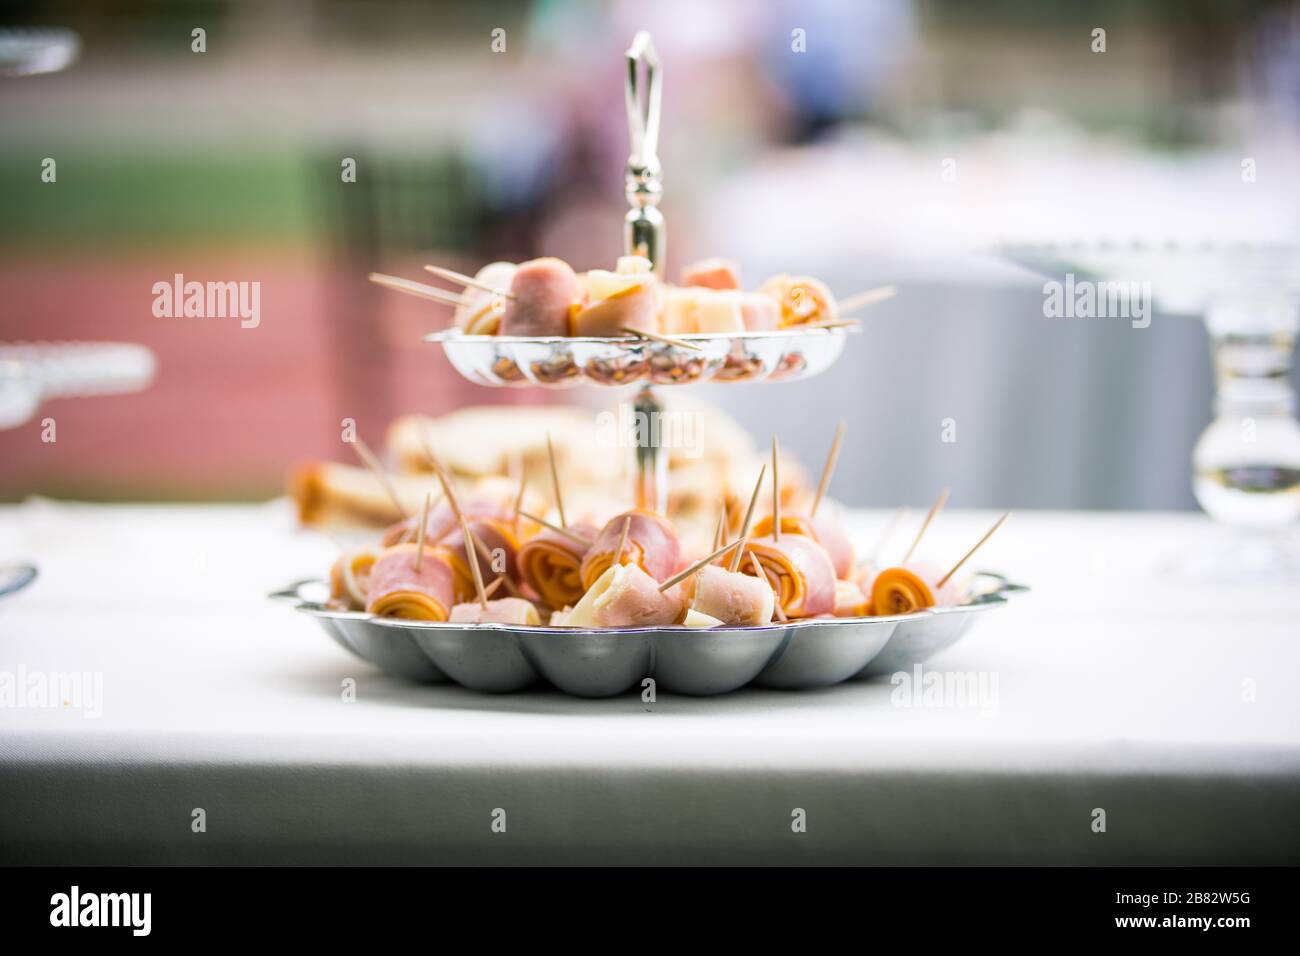 Skewers of cut meat and cheese at outdoor wedding reception Stock Photo